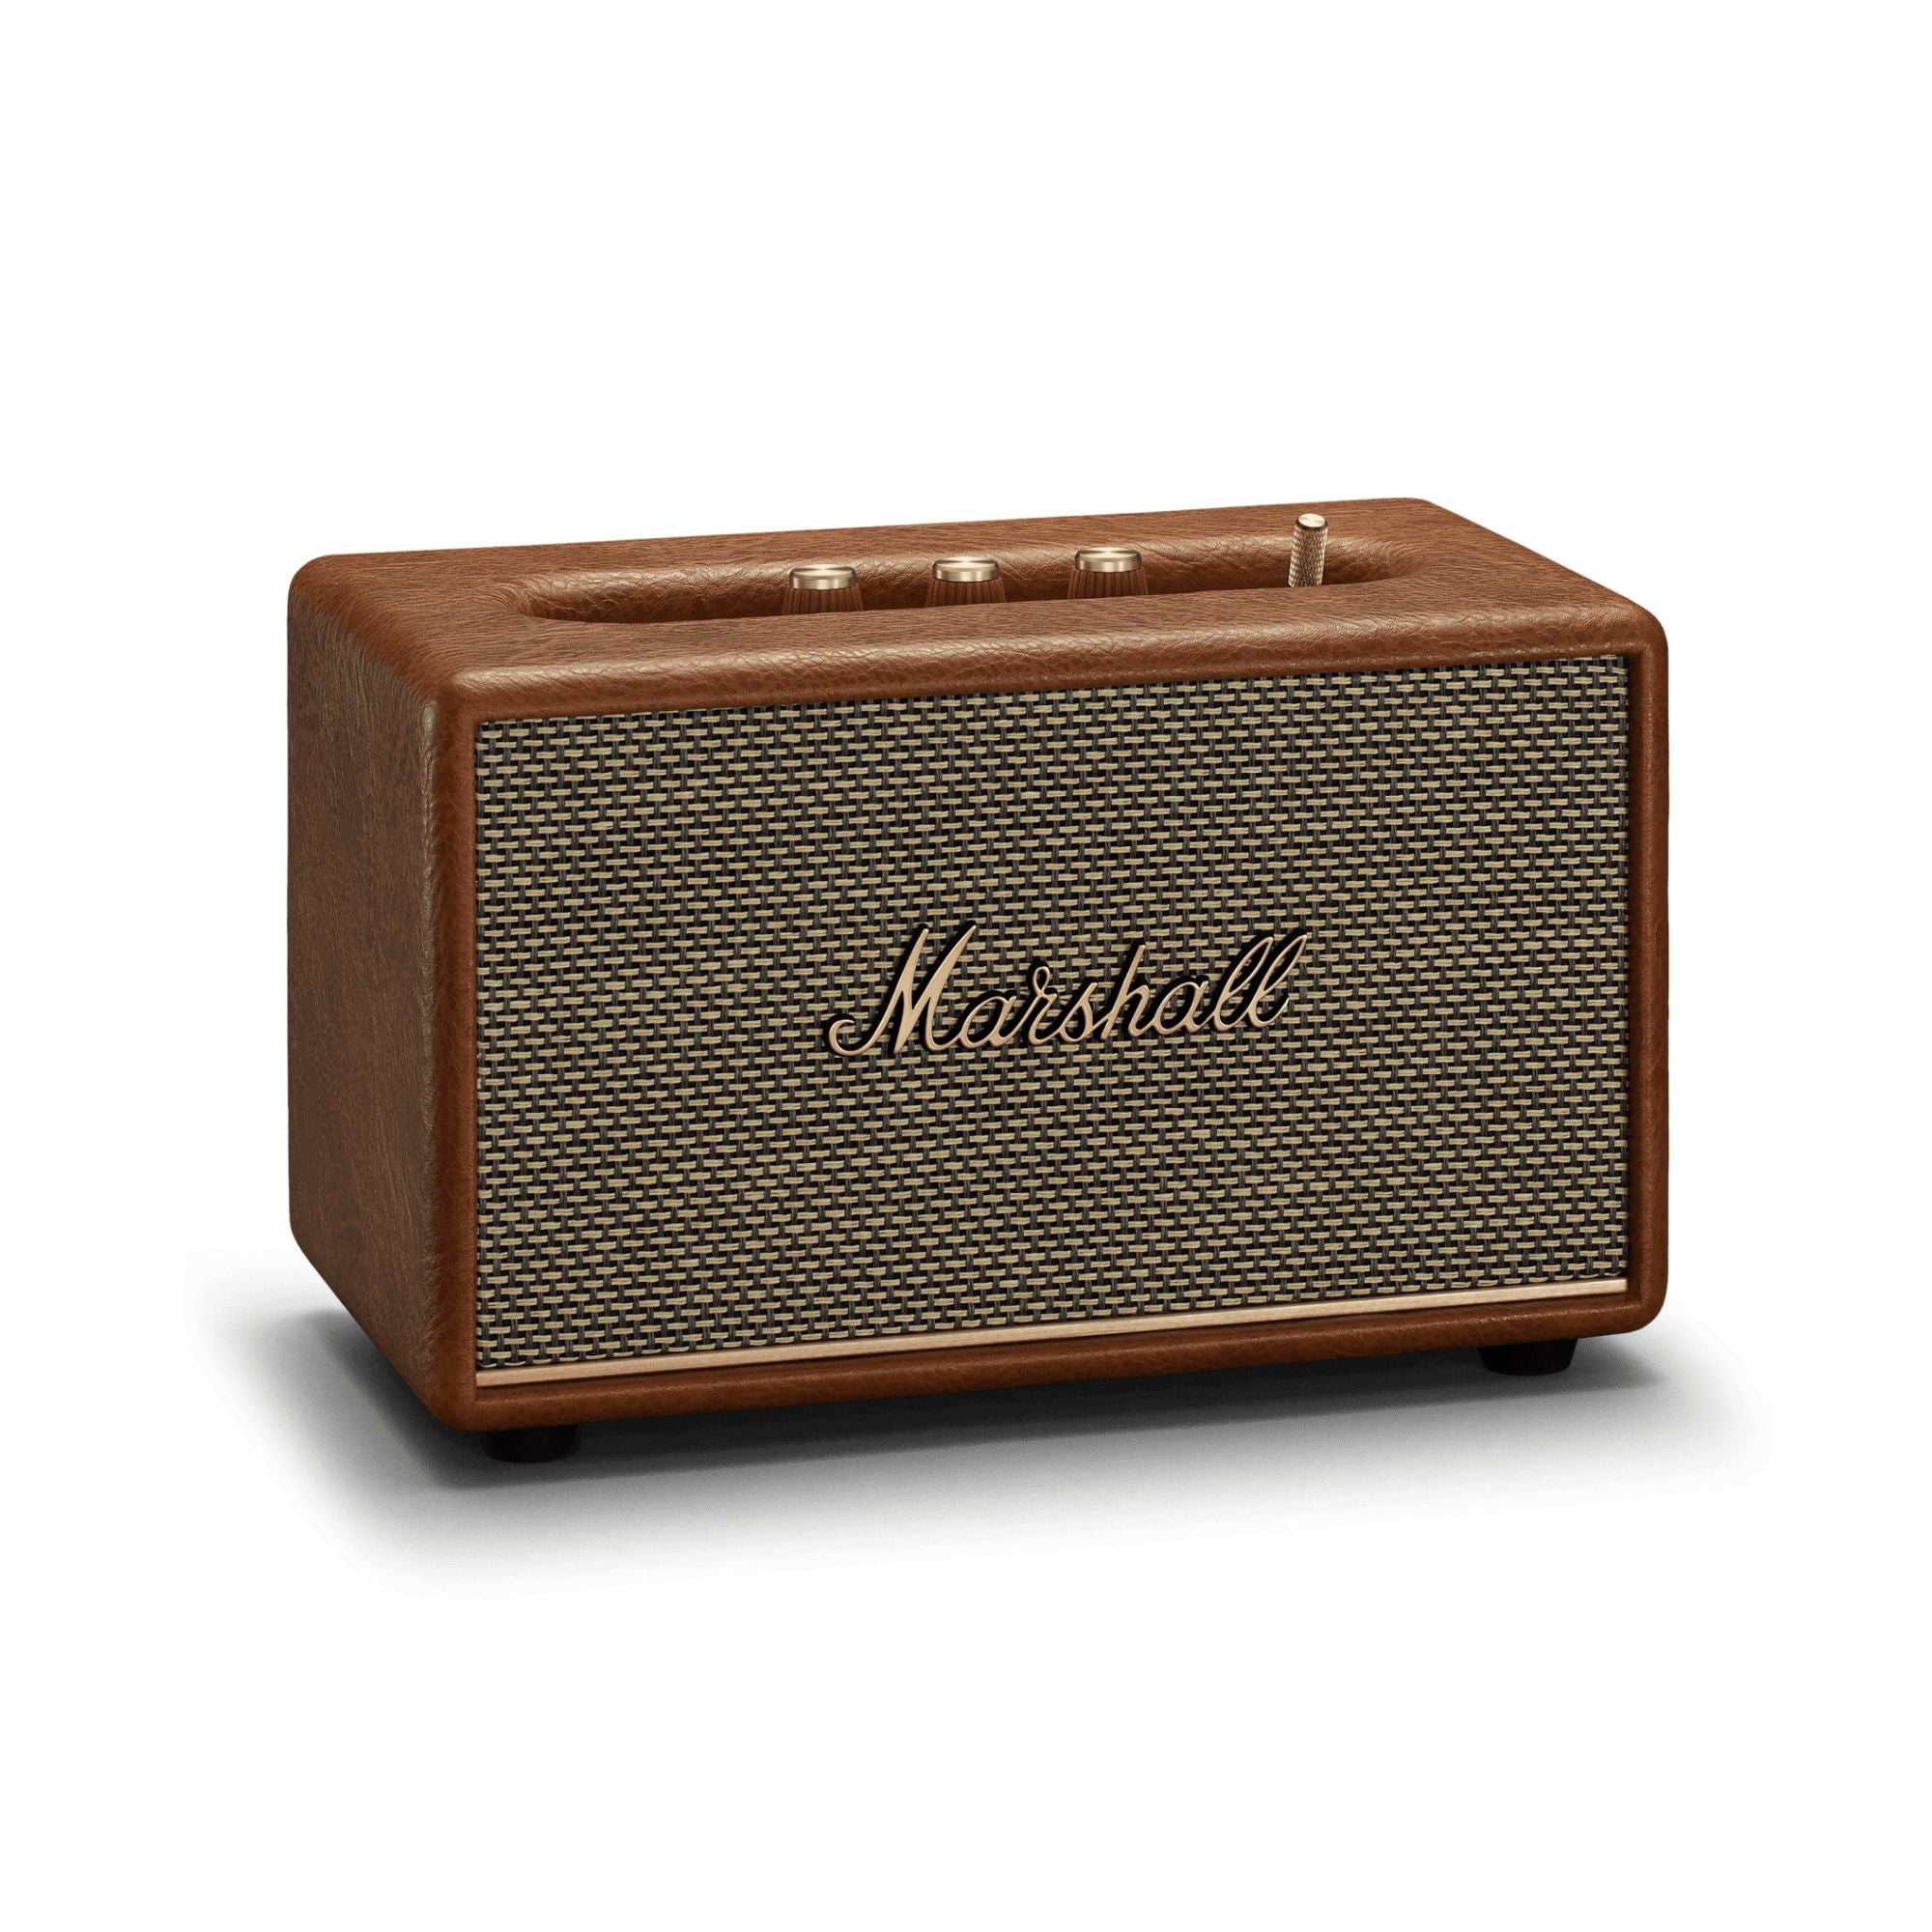 Marshall Acton III - The Small But Mighty Workhorse Re-Engineered With a Wider Soundstage, Marshall, Bluetooth Speaker - AVStore.in